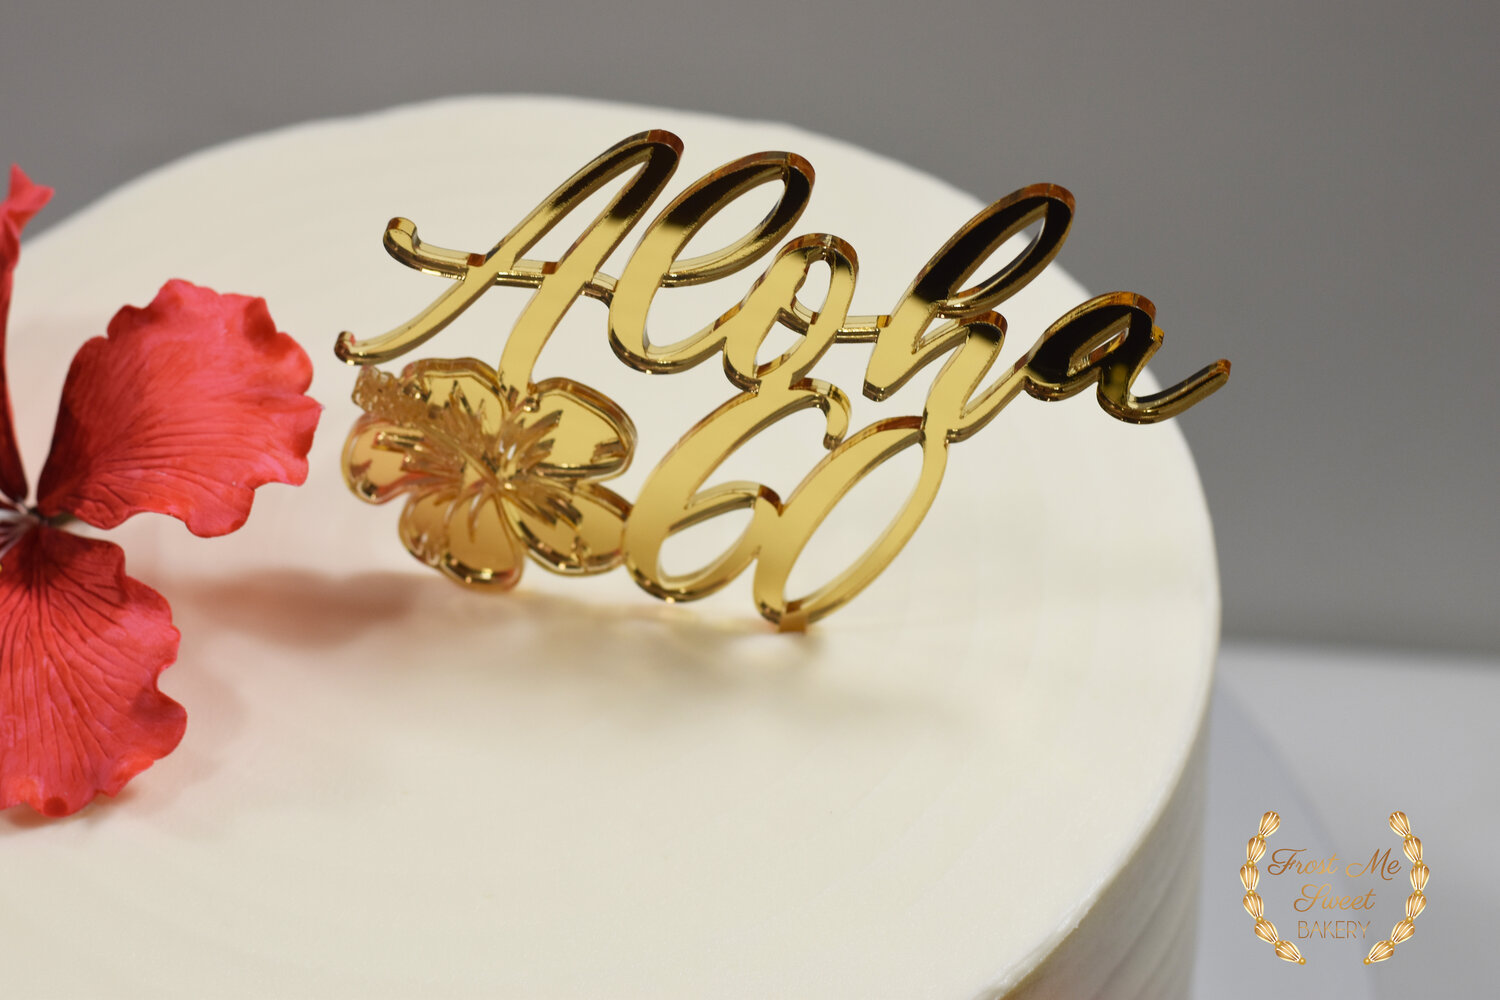 Personalised Acrylic Cake Topper,Choice Of Wording And Colours